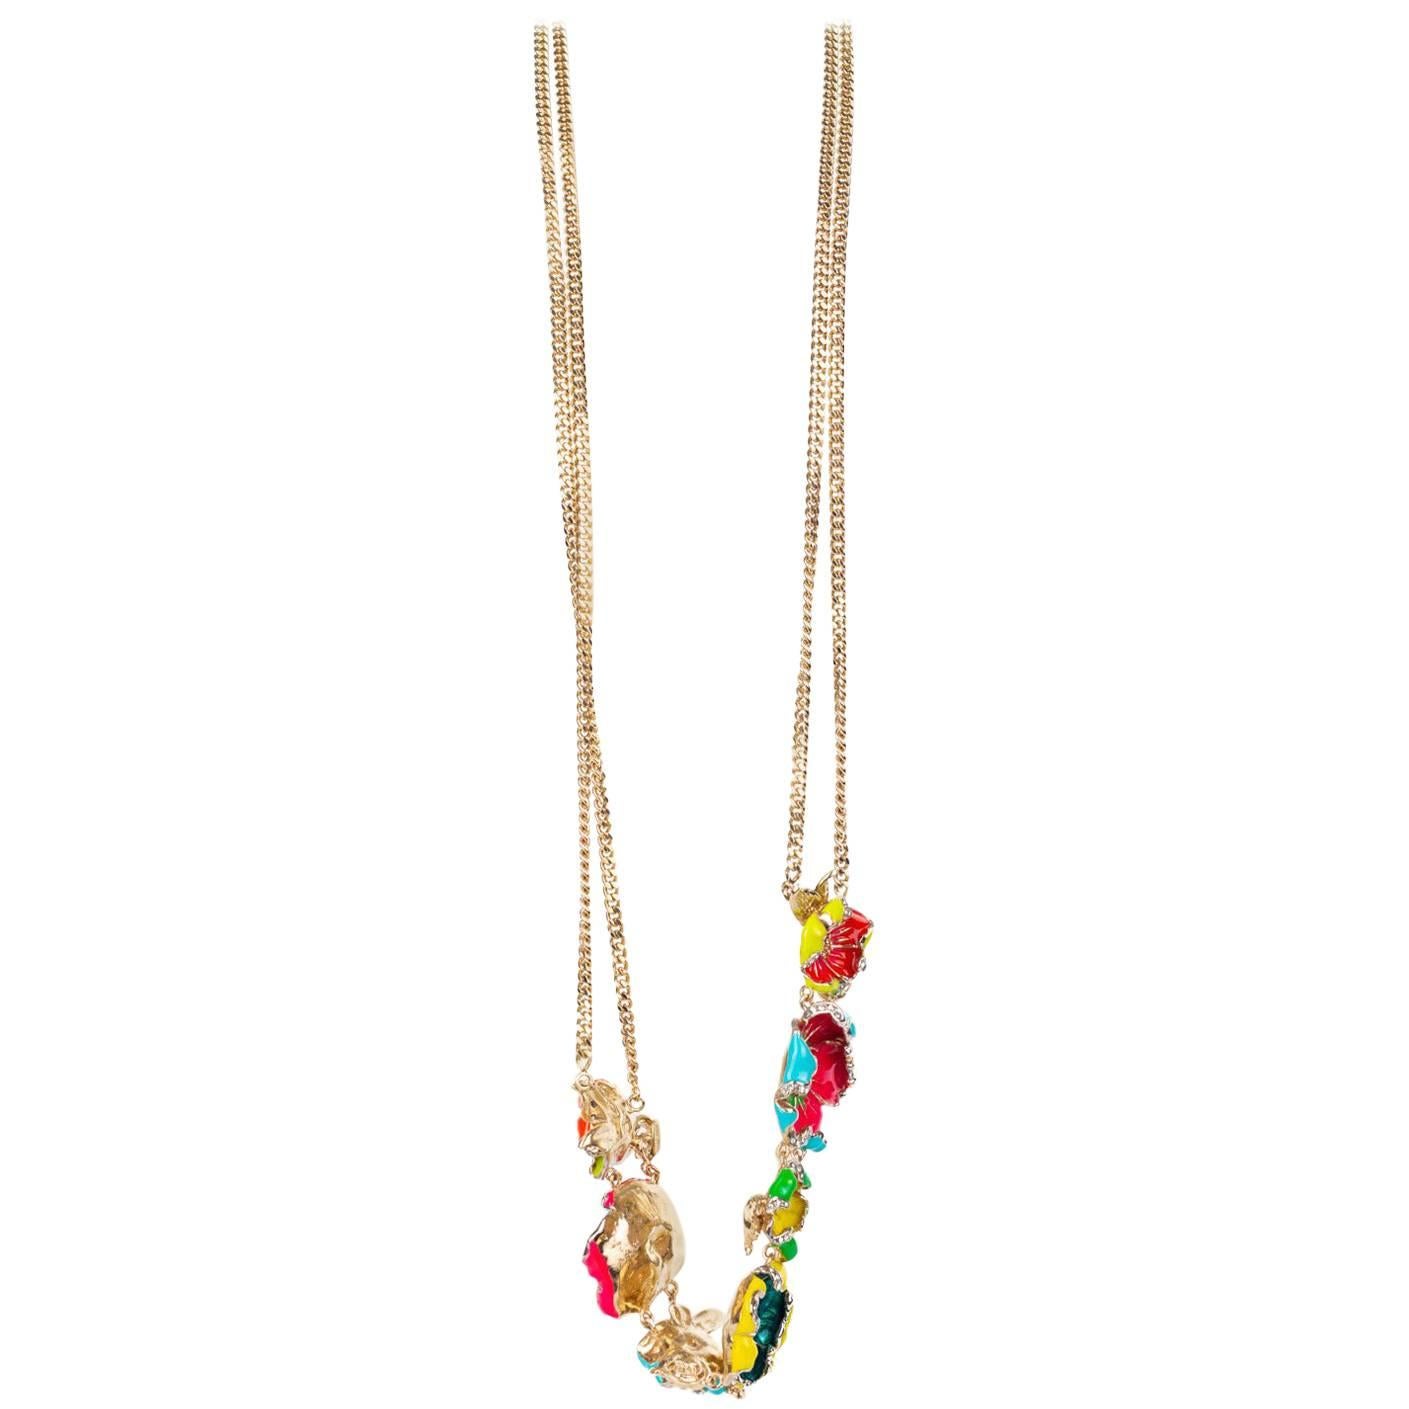 Roberto Cavalli Multicolored Floral Embellished Double Chain Necklace  For Sale